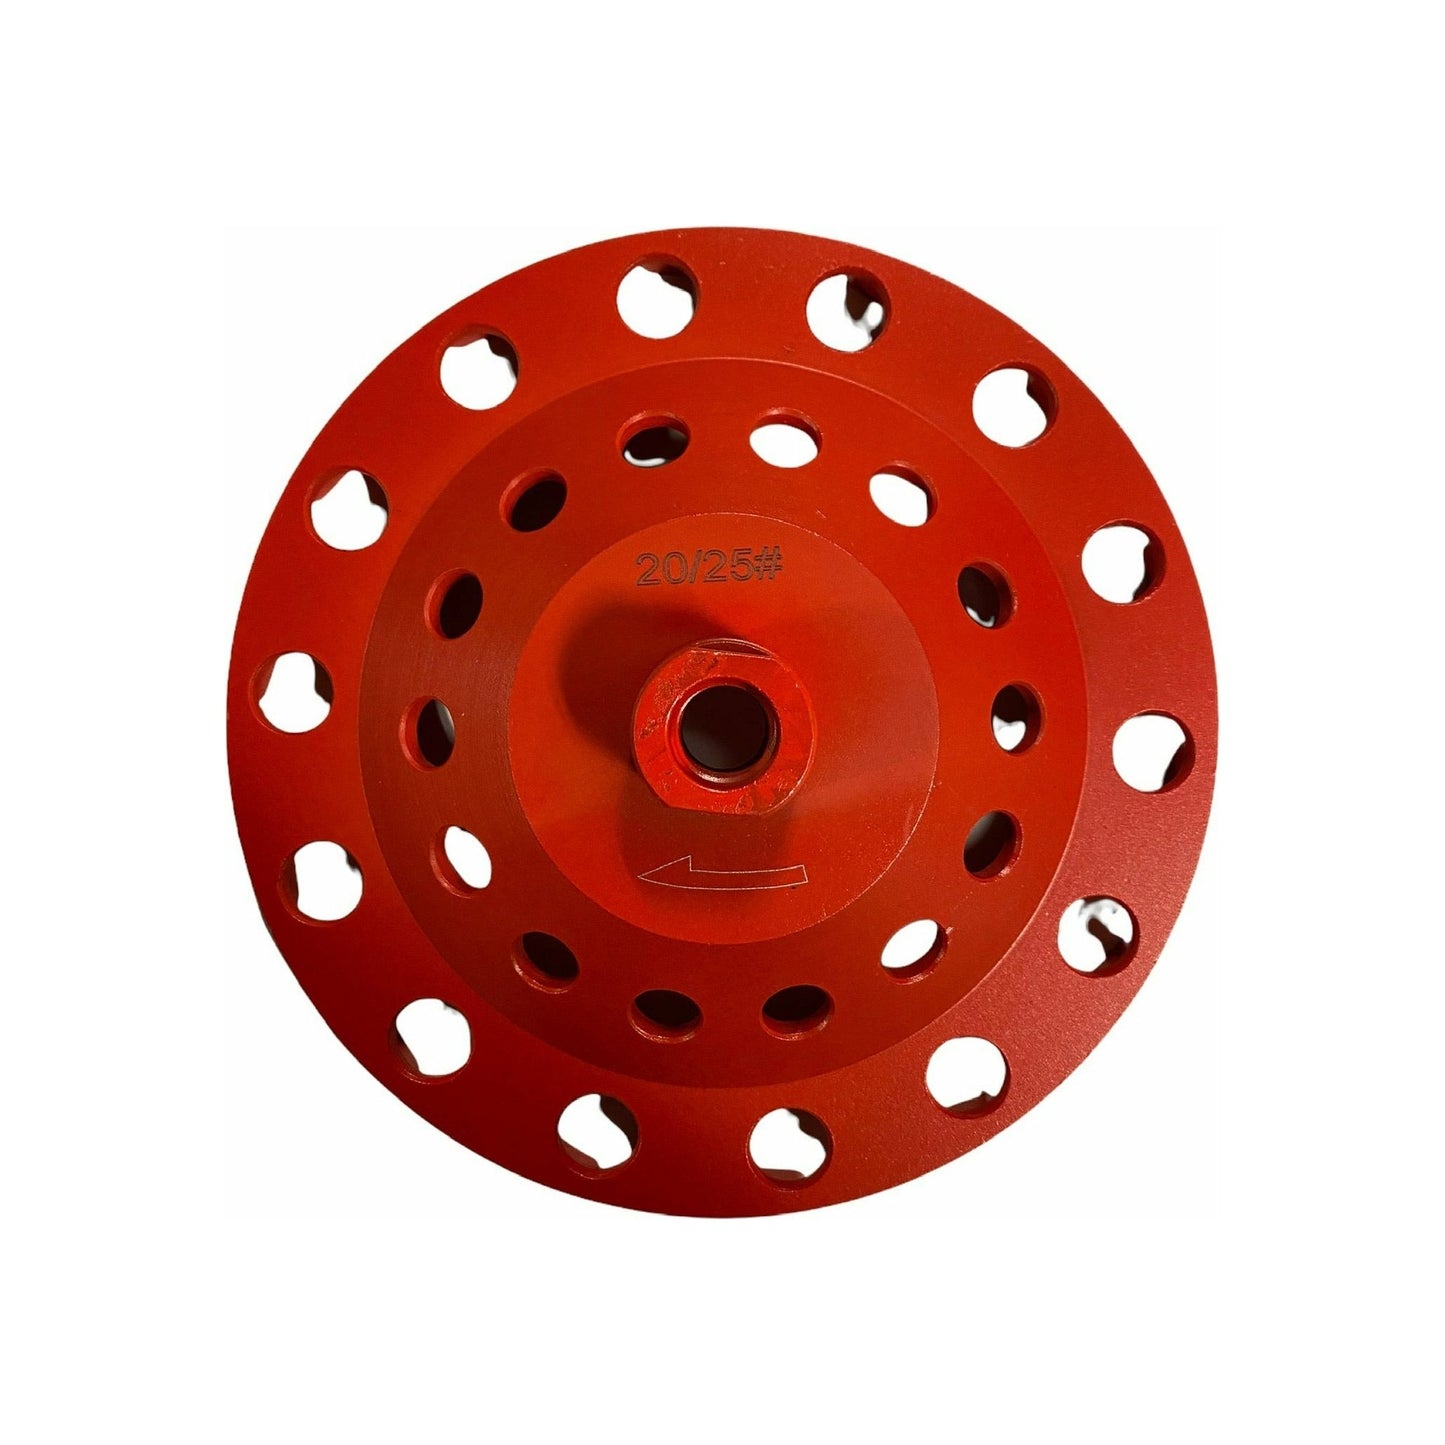 7" Aggressive Grinding Cup Wheel 